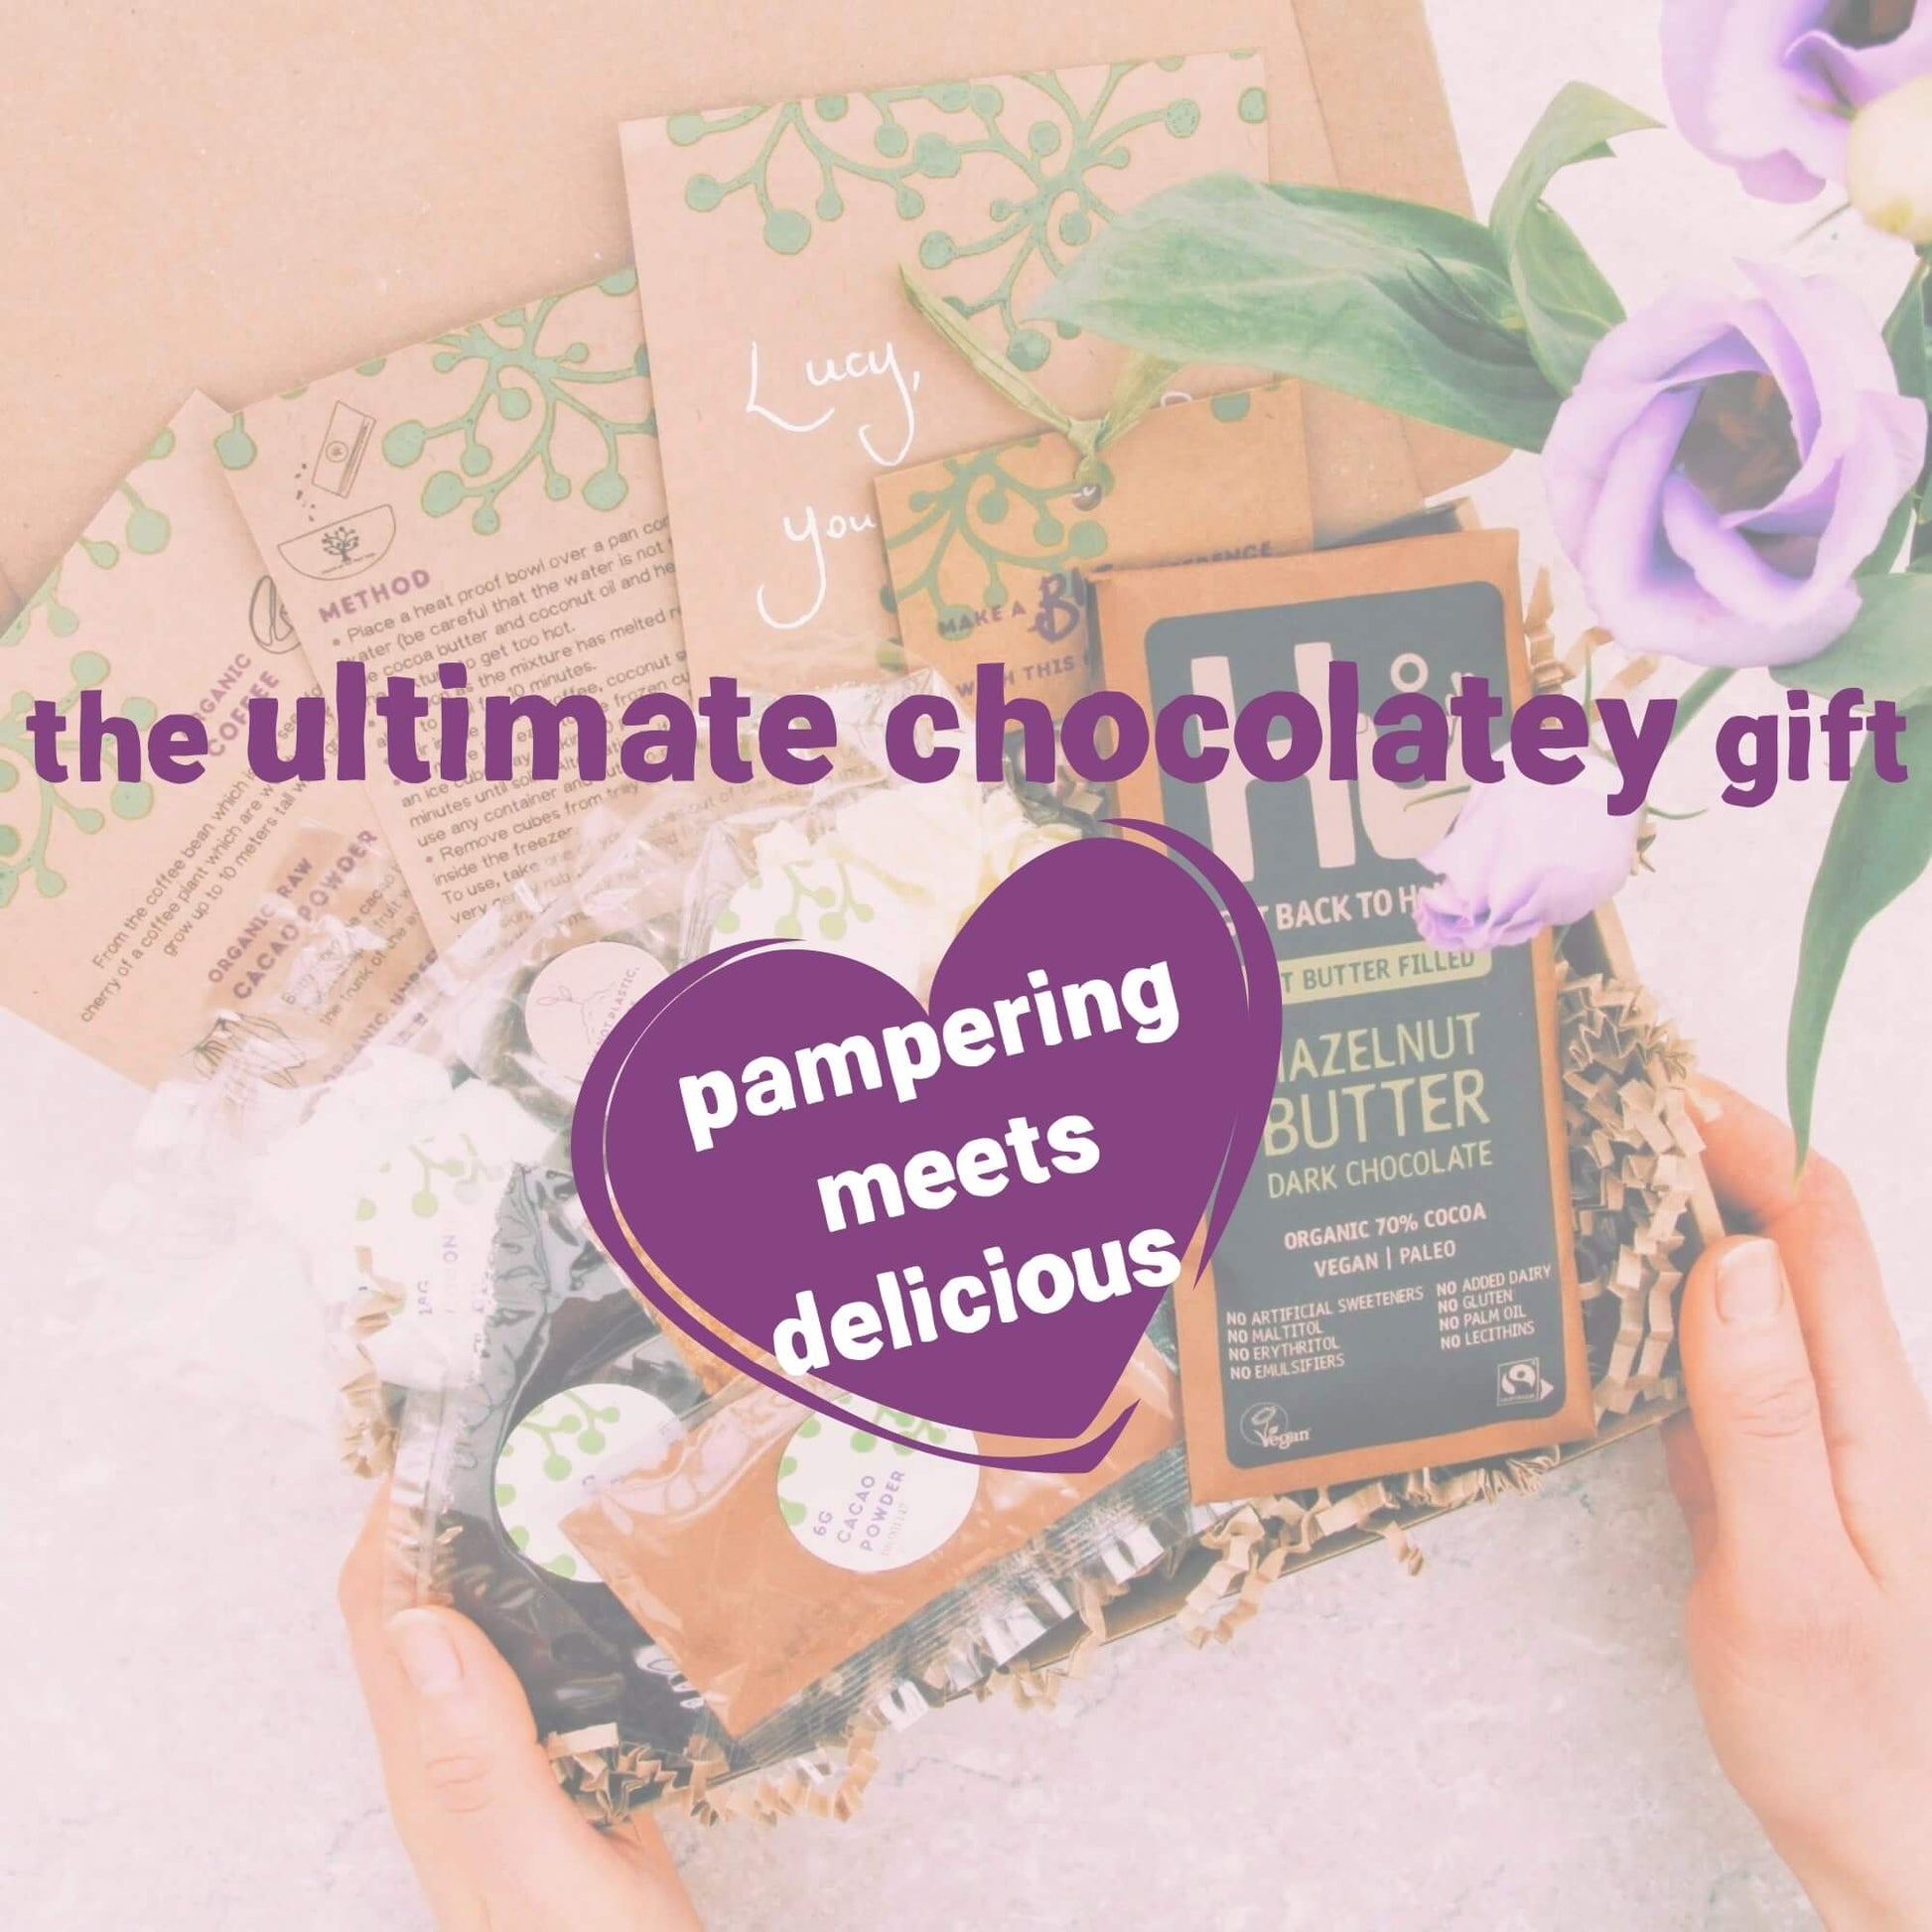 best friend gift pampering meets delicious